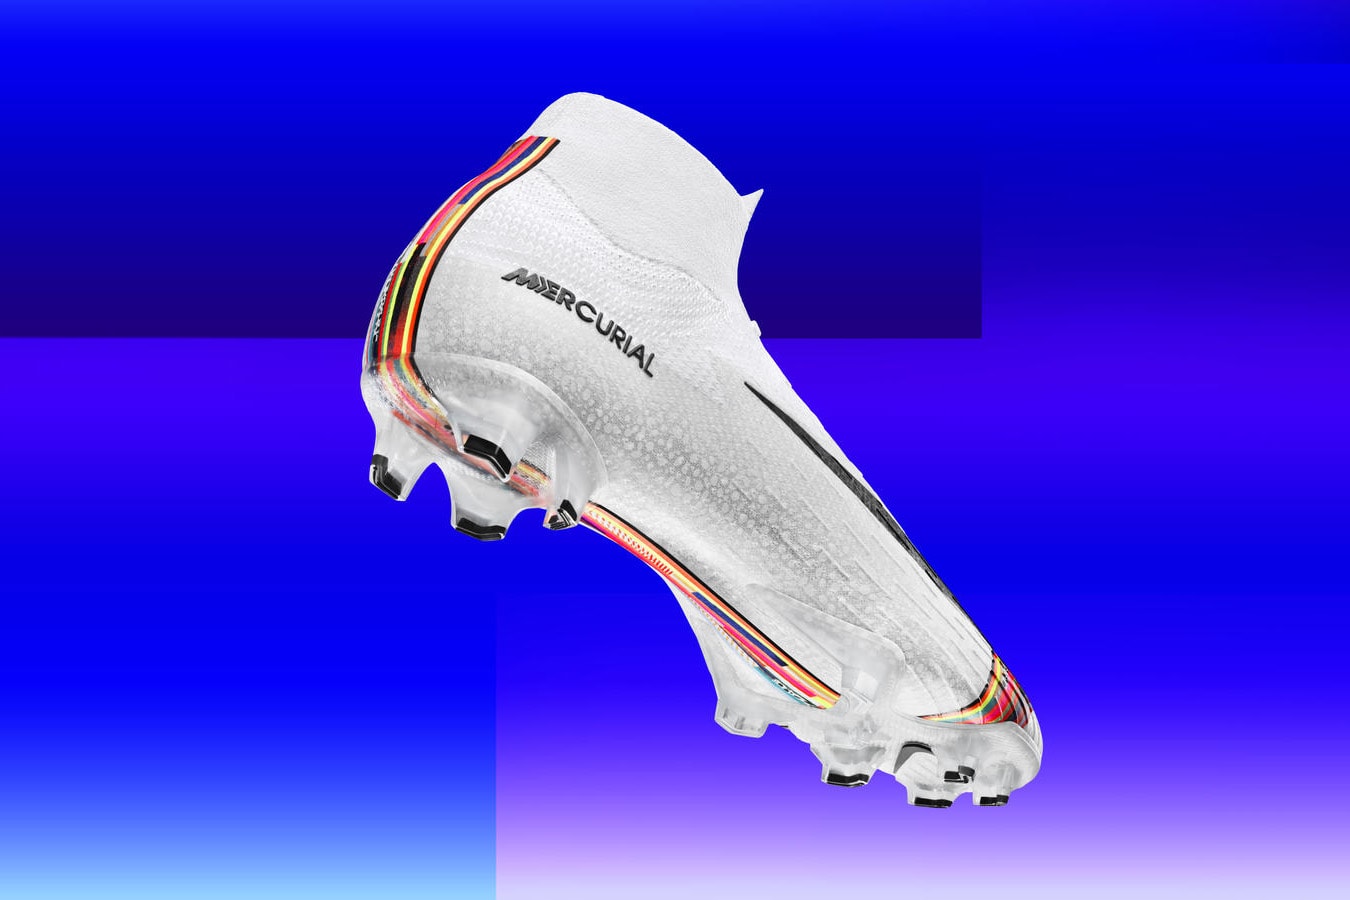 Nike Mercurial 360 Superfly LVL UP Football Boots Cleats White safari silverware cheetah galaxy gold lava-inspired heritage inspired black swoosh lightweight 1987 running shoe 2010 boots